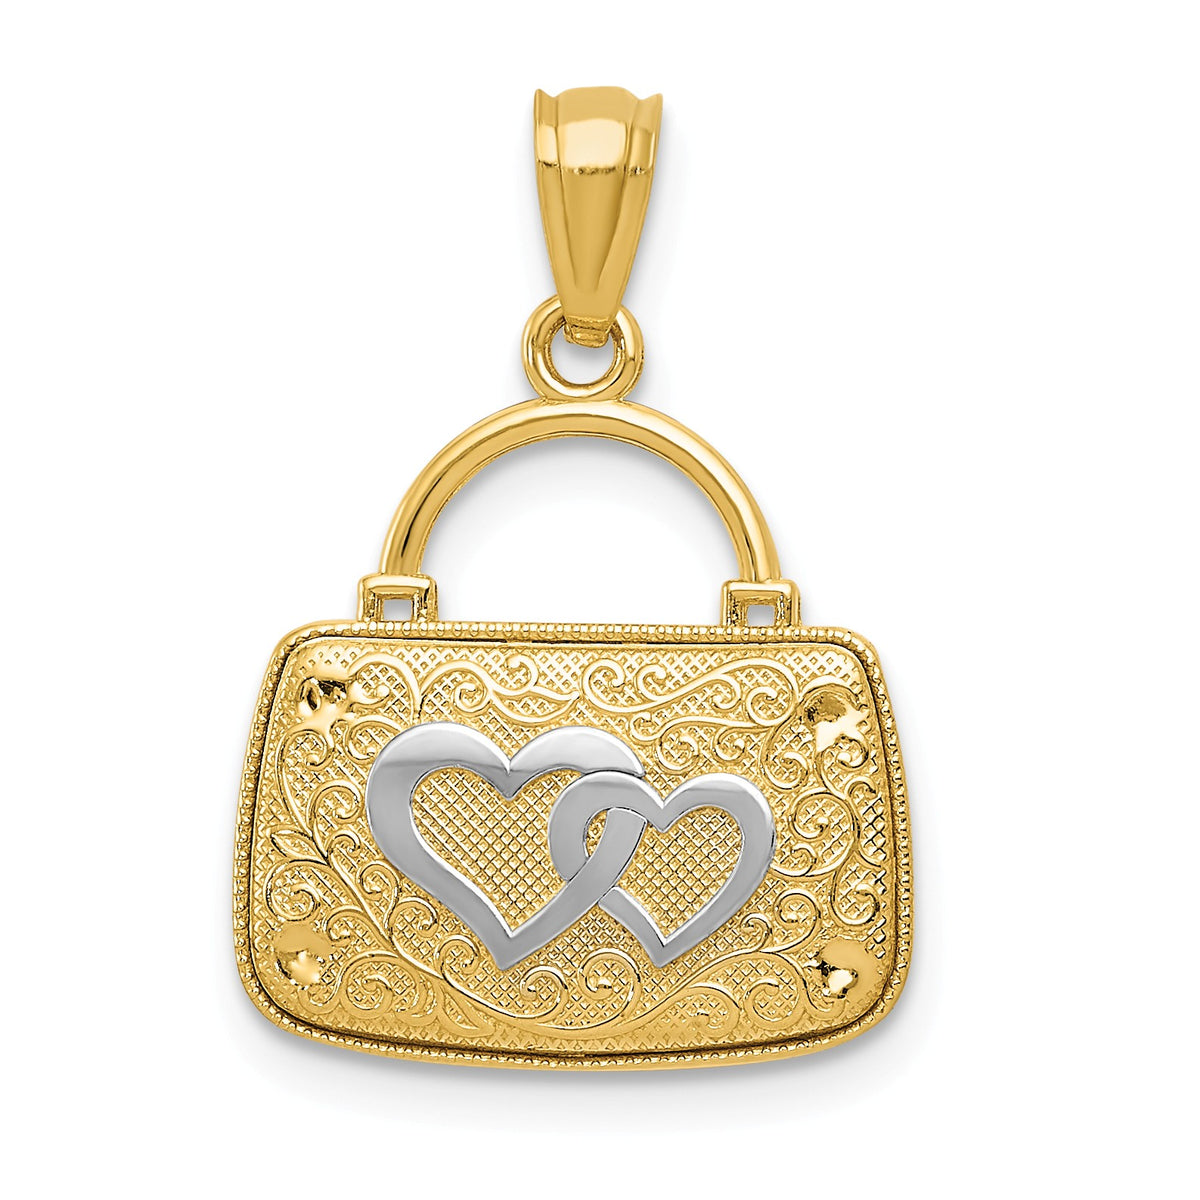 Alternate view of the 14k Yellow Gold &amp; White Rhodium Reversible Heart Handbag Pendant by The Black Bow Jewelry Co.